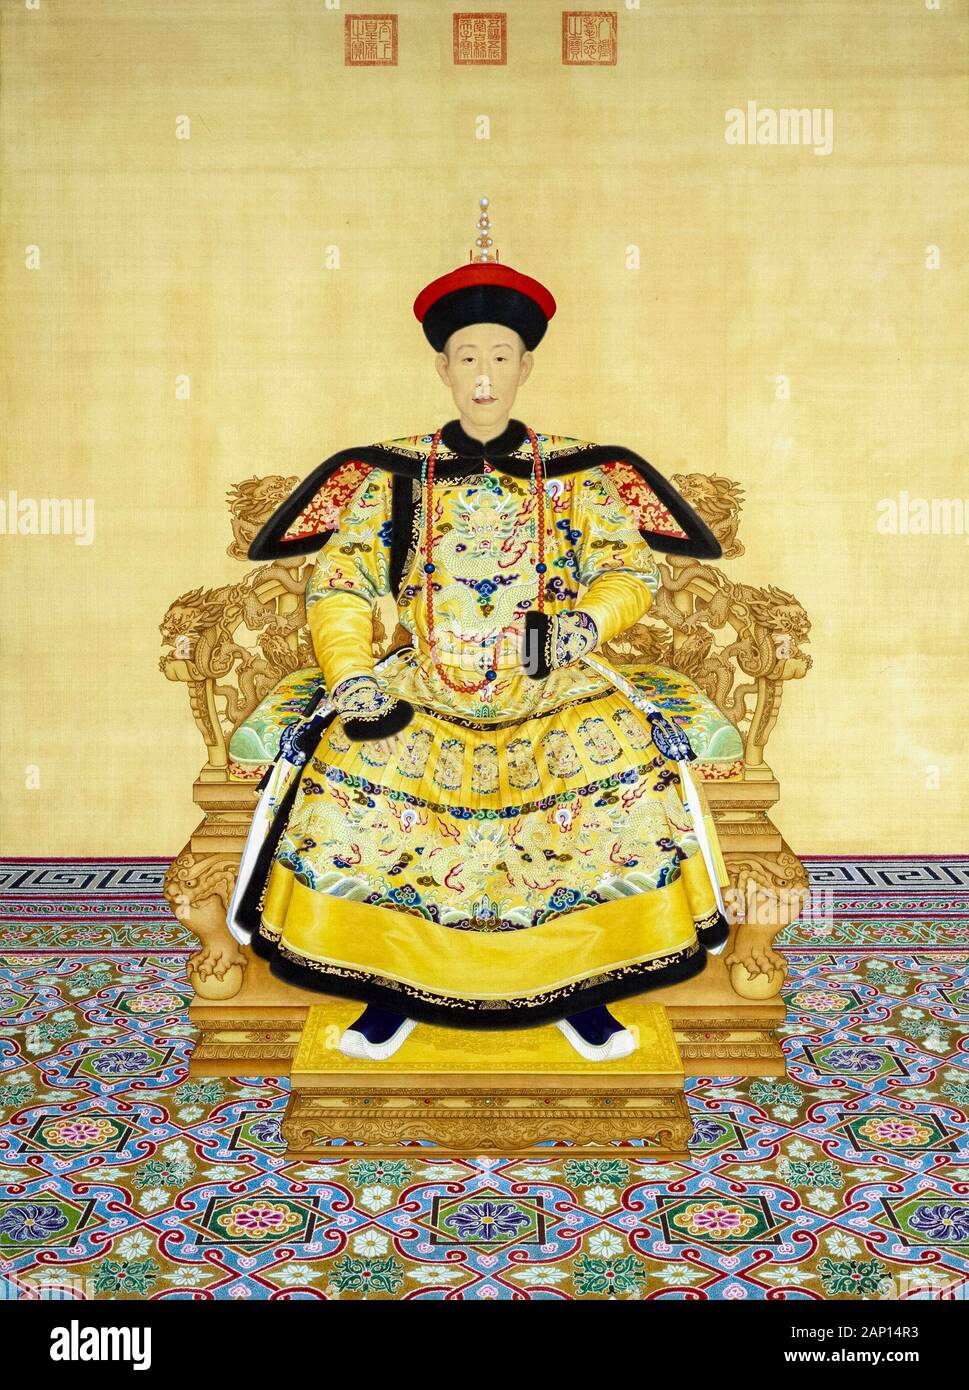 Chinese Emperor The Qianlong Emperor (1711-1799) in court dress, portrait painting by Giuseppe Castiglione, 1736 Stock Photo